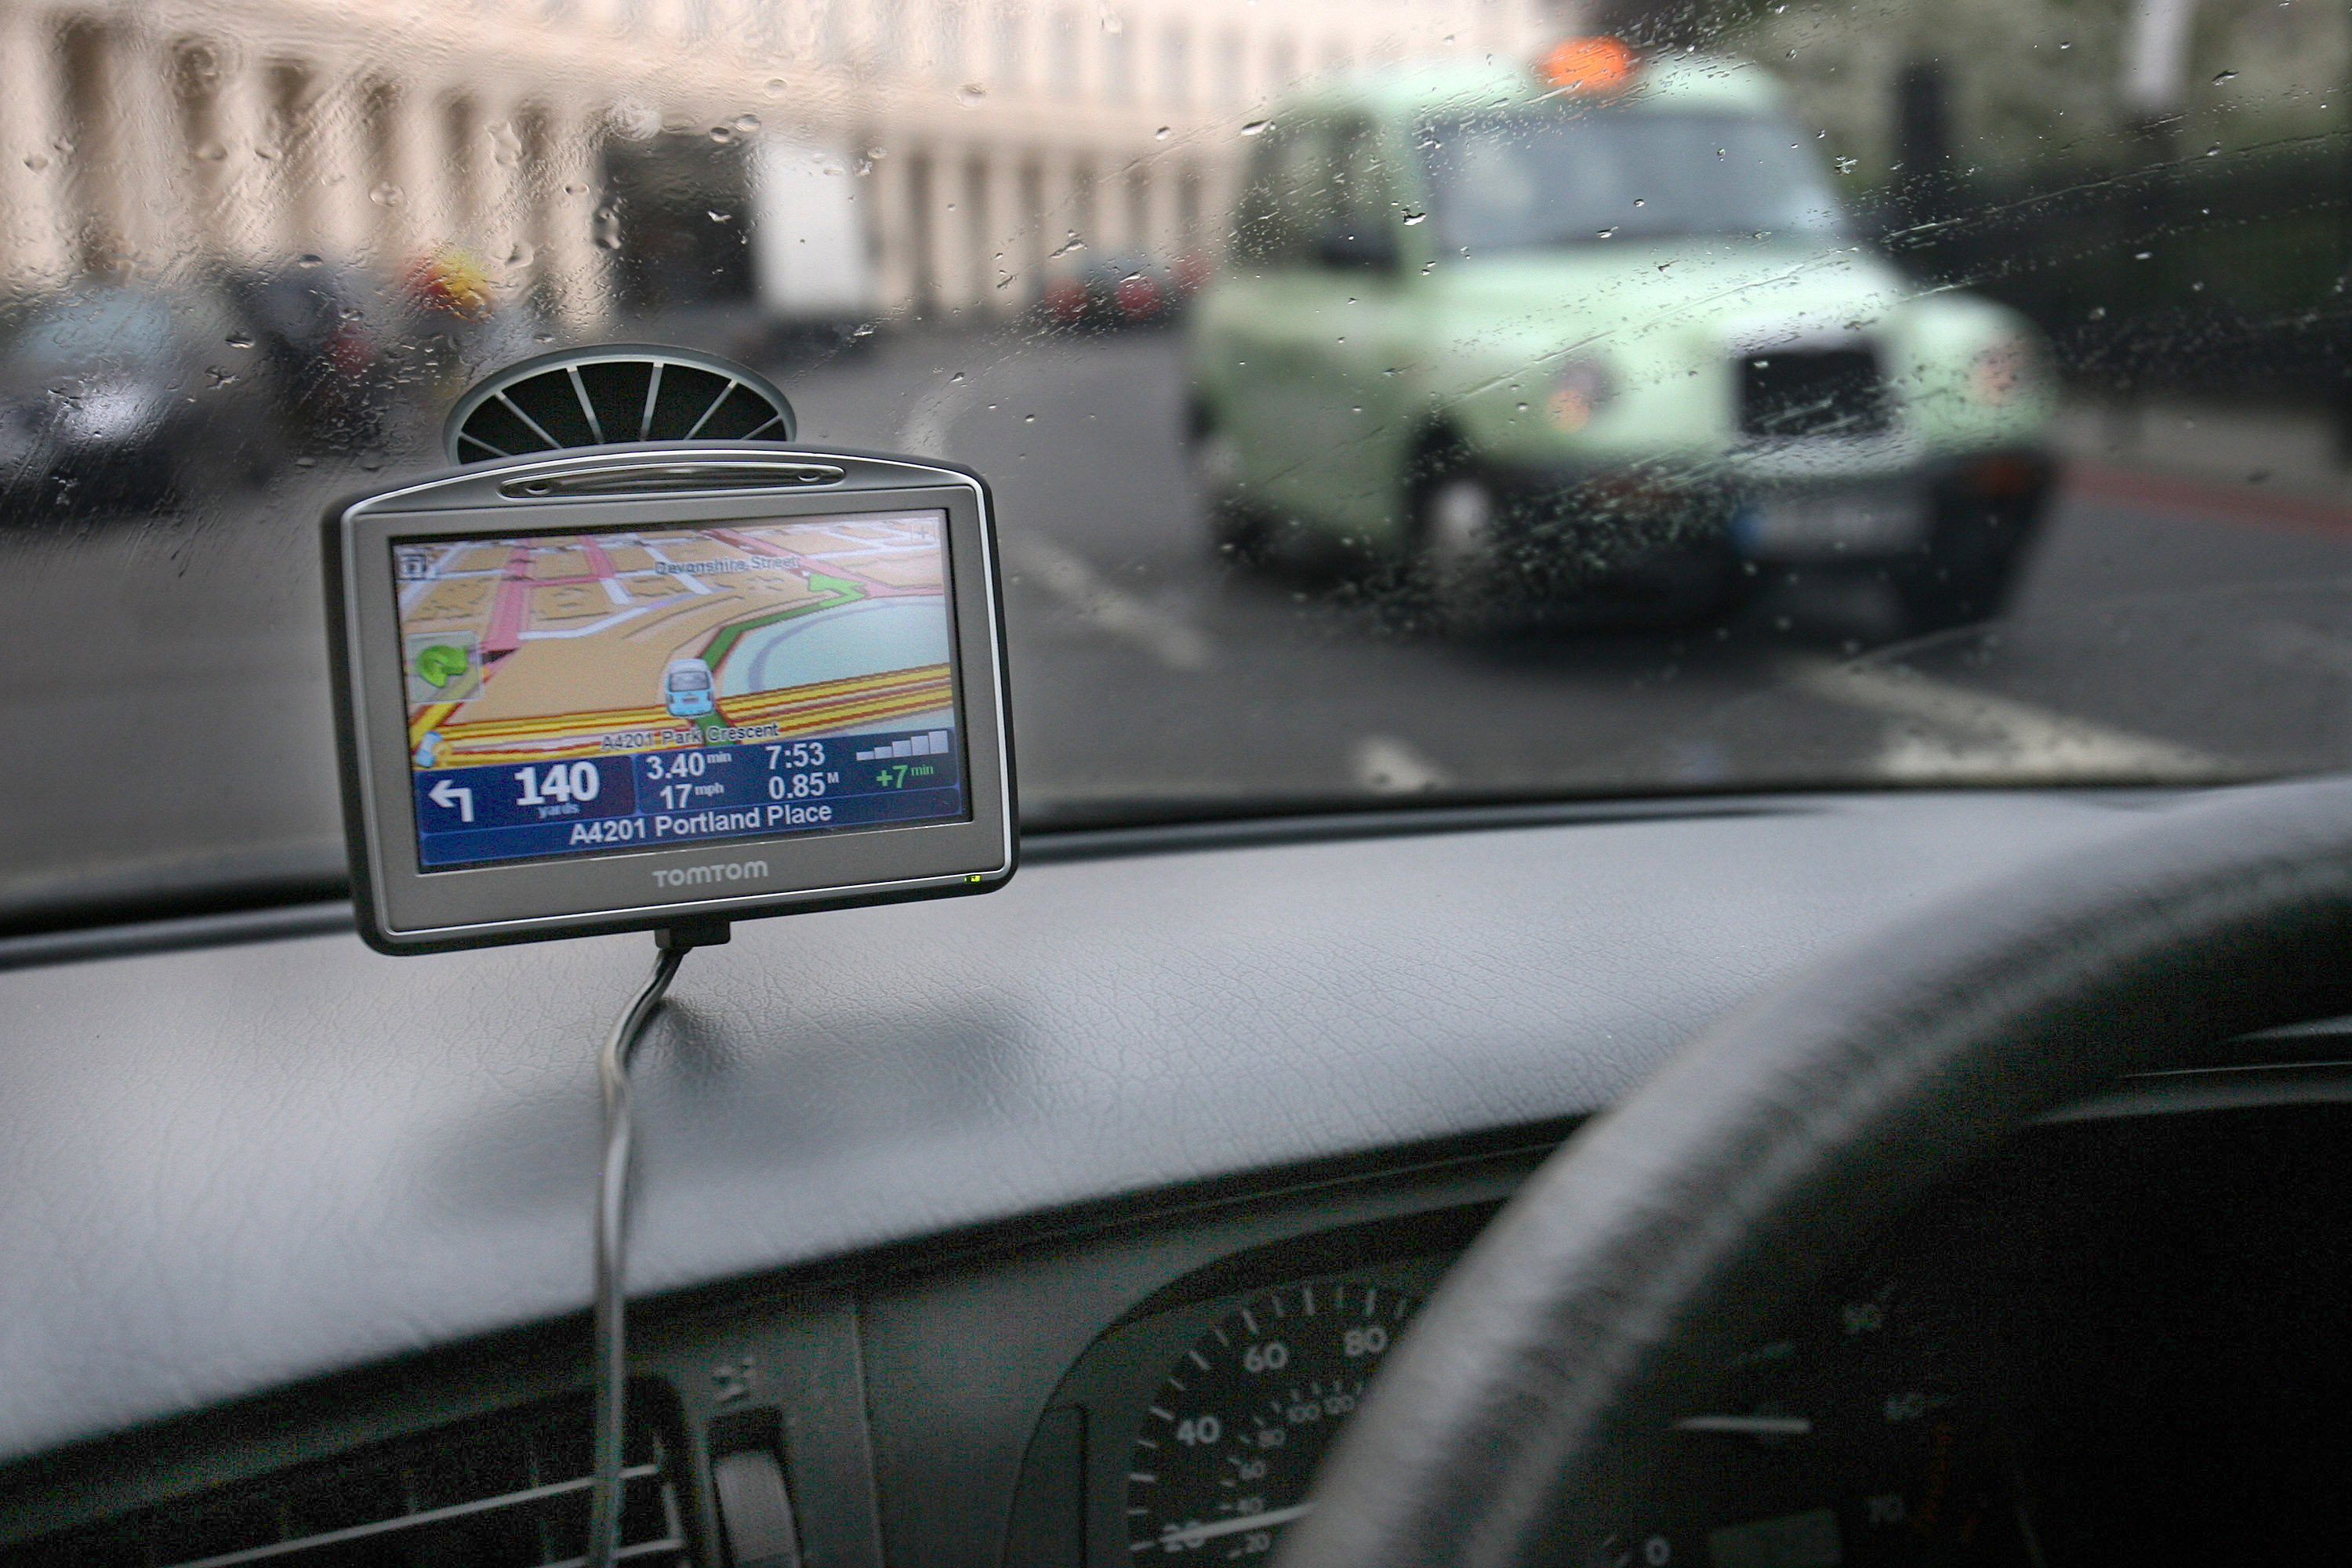 Learner drivers will be asked to follow a sat nav in the new UK driving test